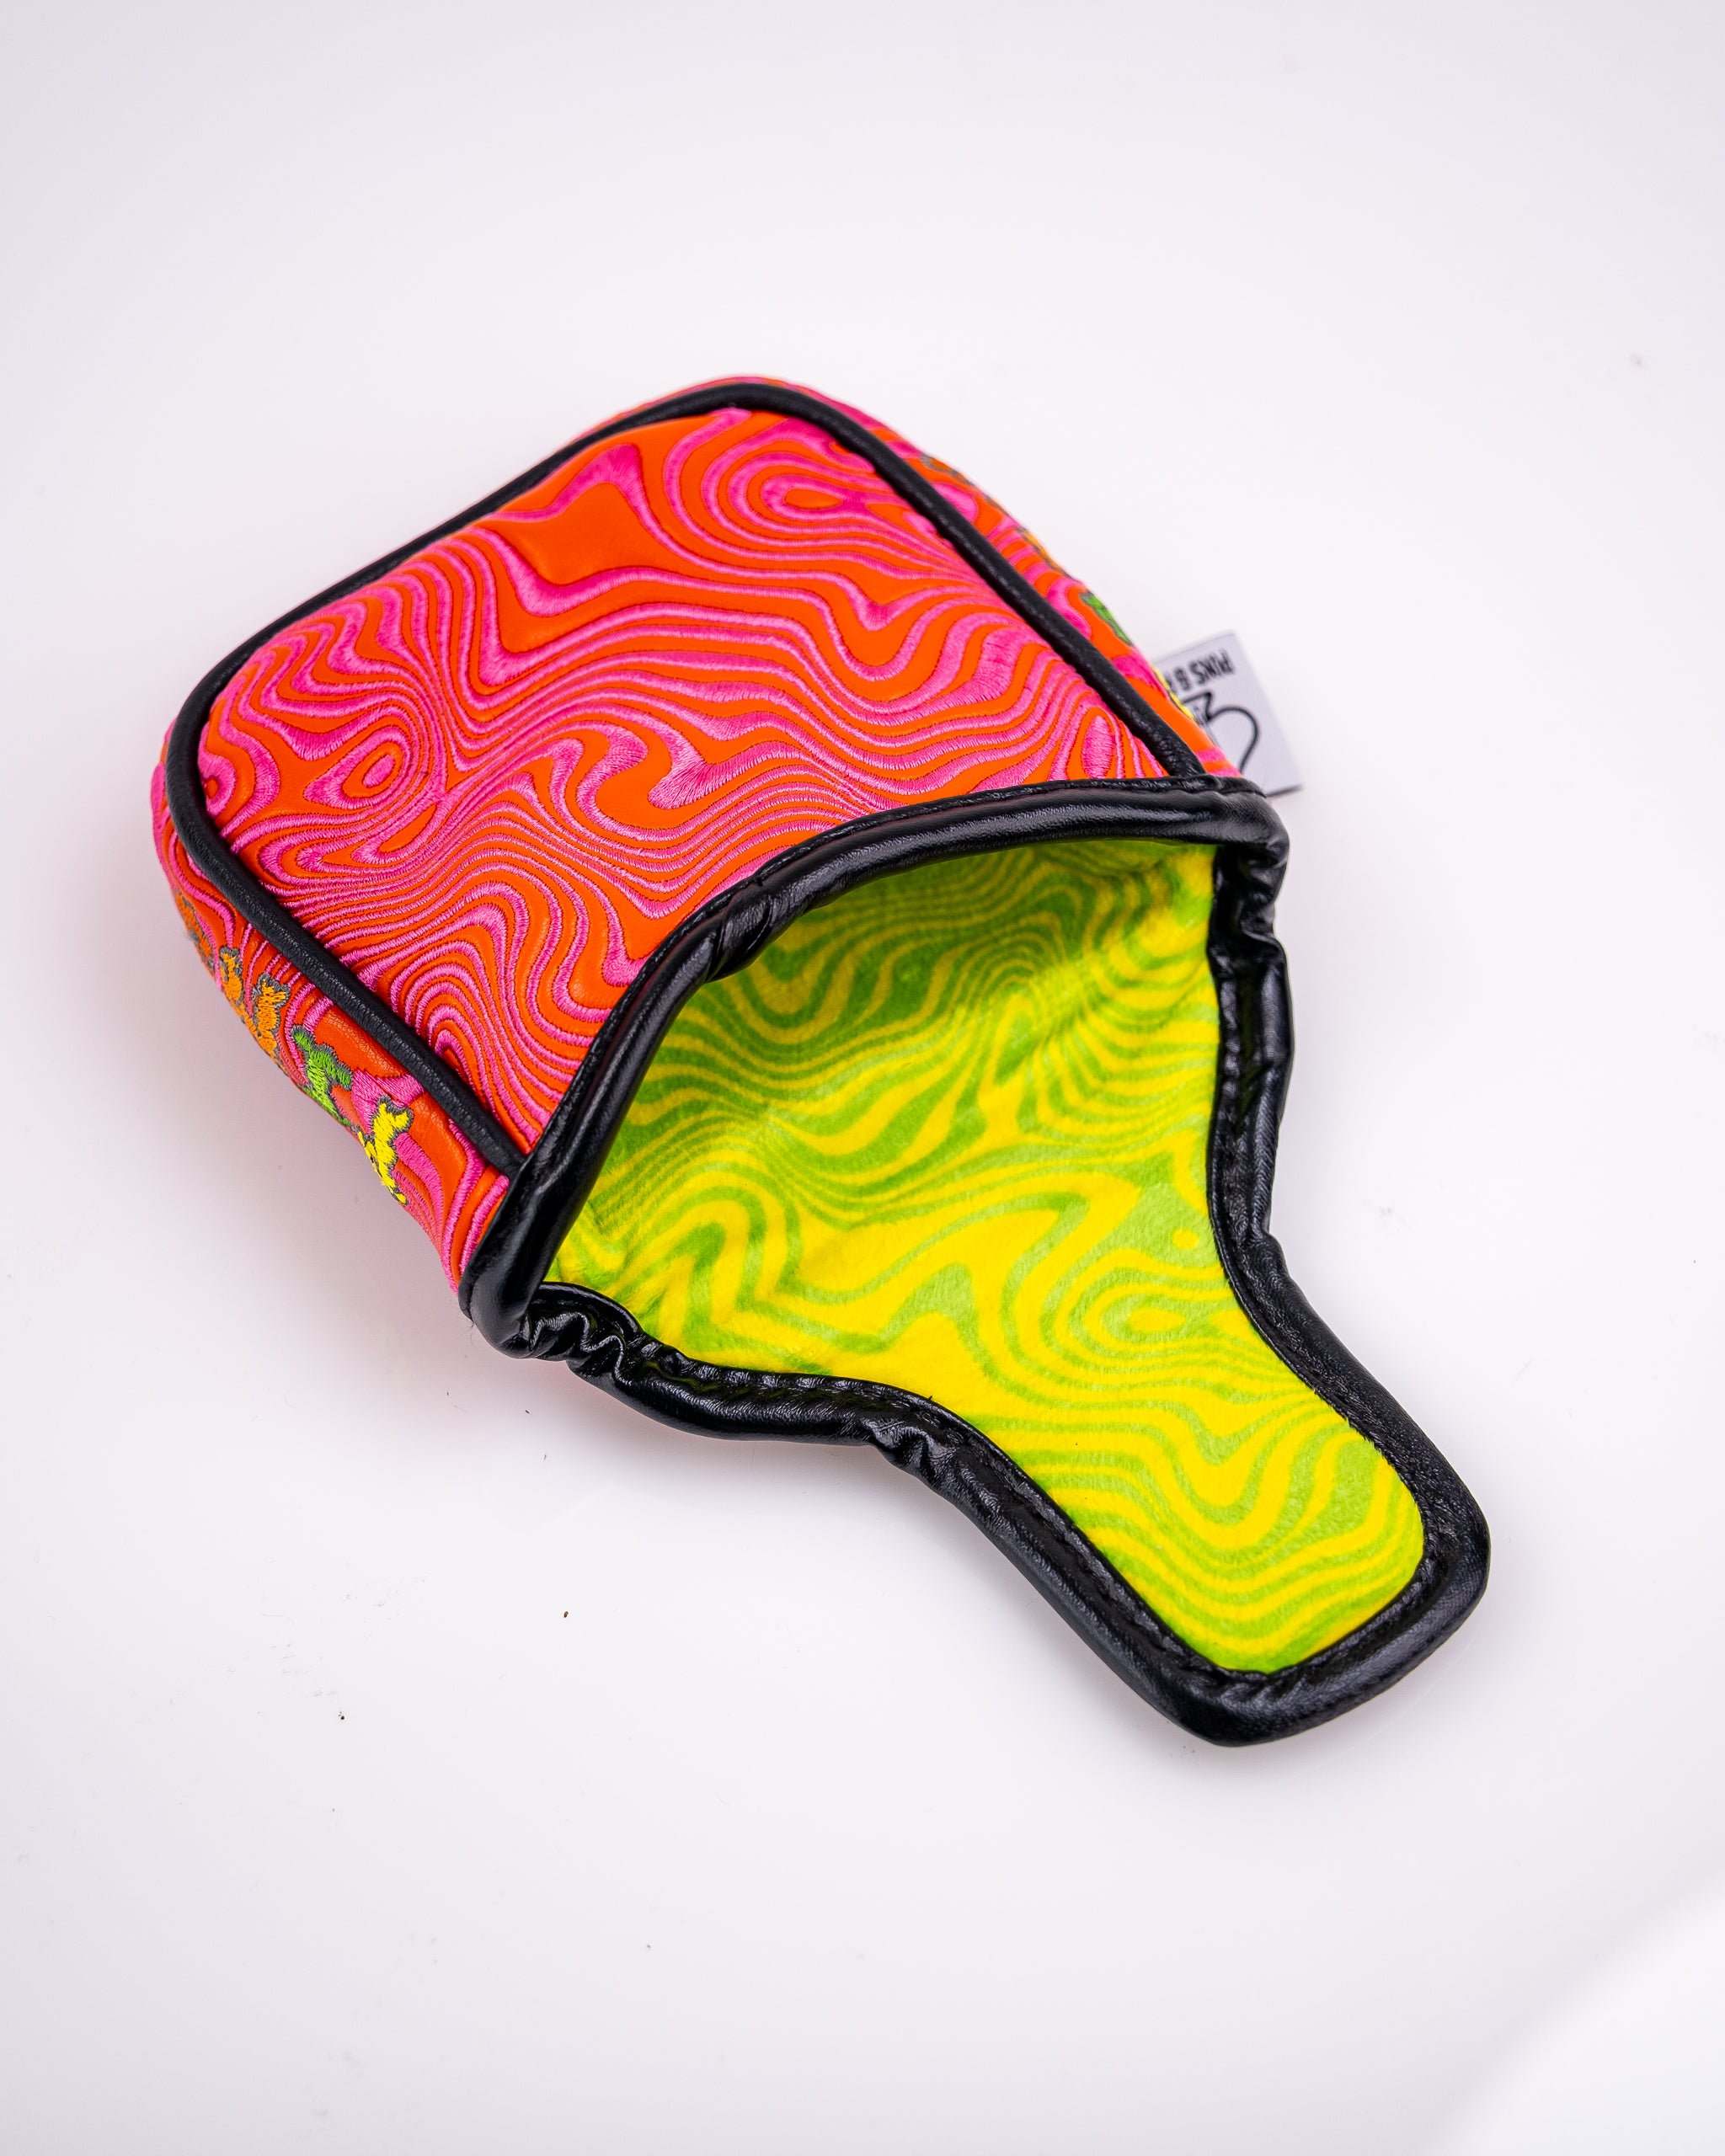 Cosmic Puff - Mallet Putter Cover